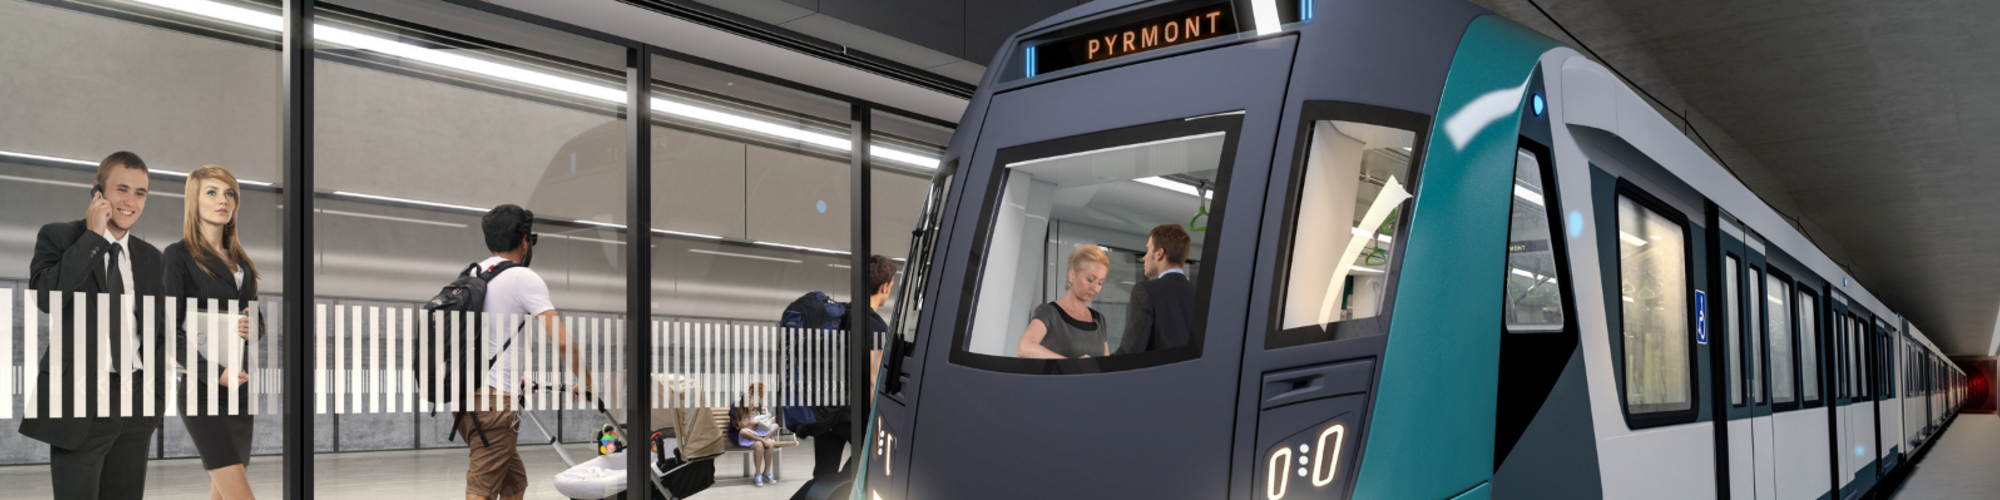 Artist's impression of Sydney Metro train entering the platform with passengers waiting behind the screen doors at Pyrmont Station.